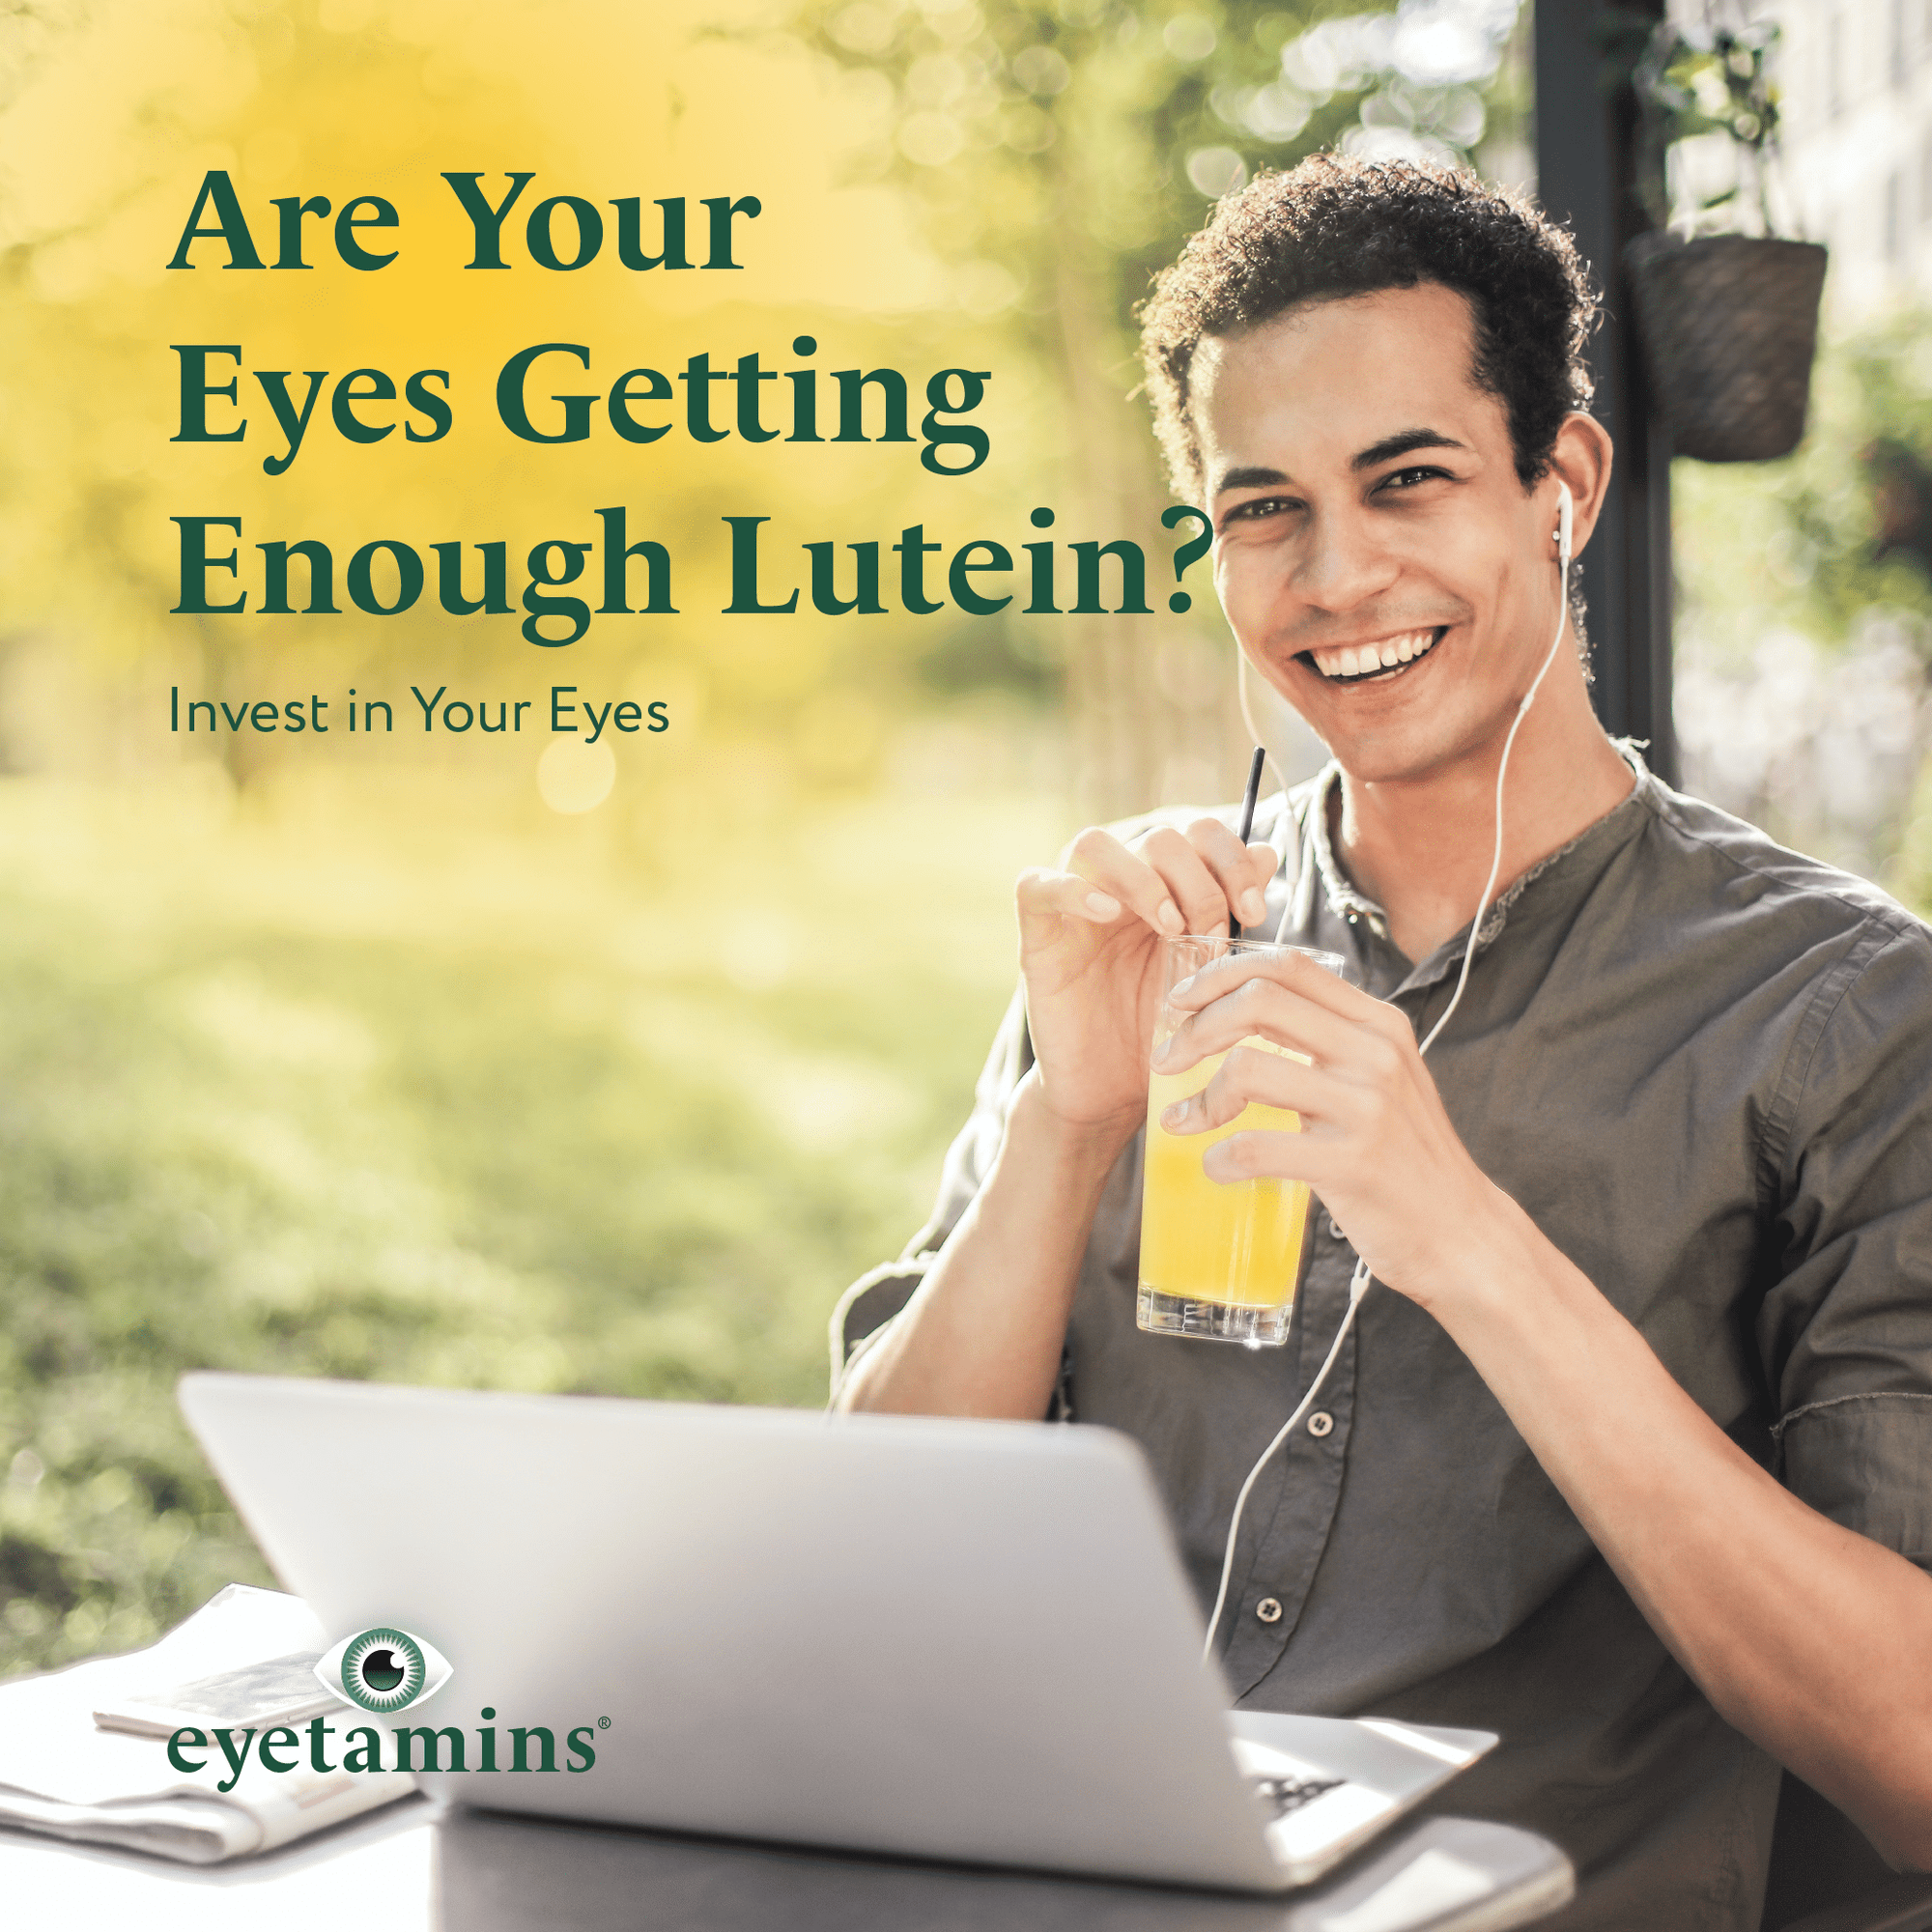 Eyetamins - Are Your Eyes Getting Enough Lutein?